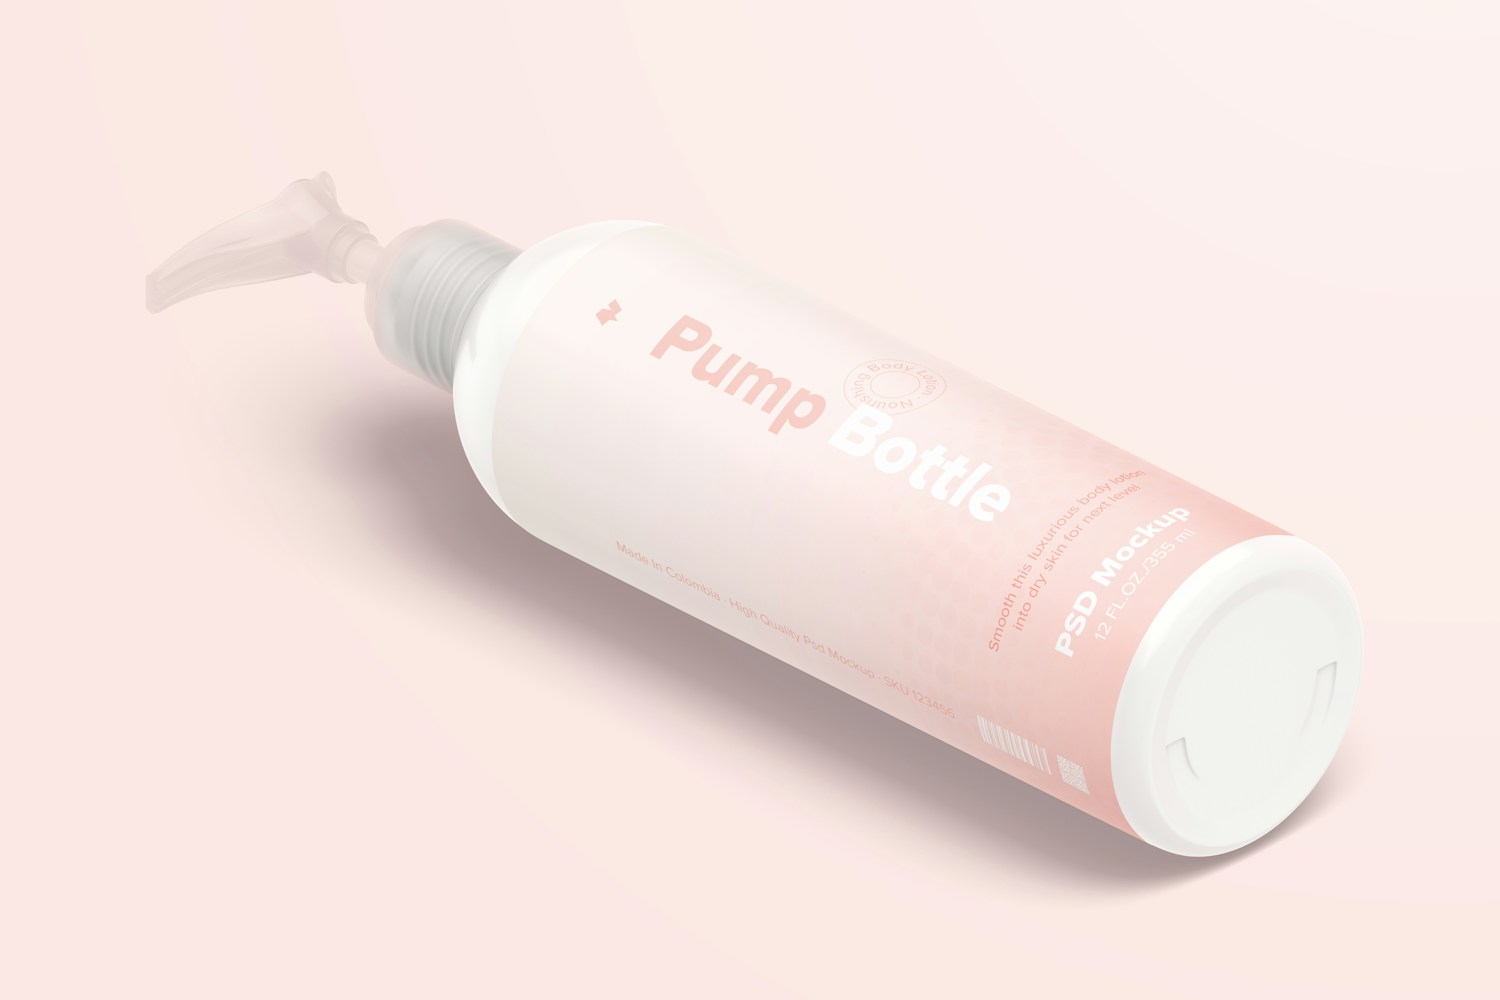 12 oz Pump Rounded Bottle Mockup, Isometric Right View